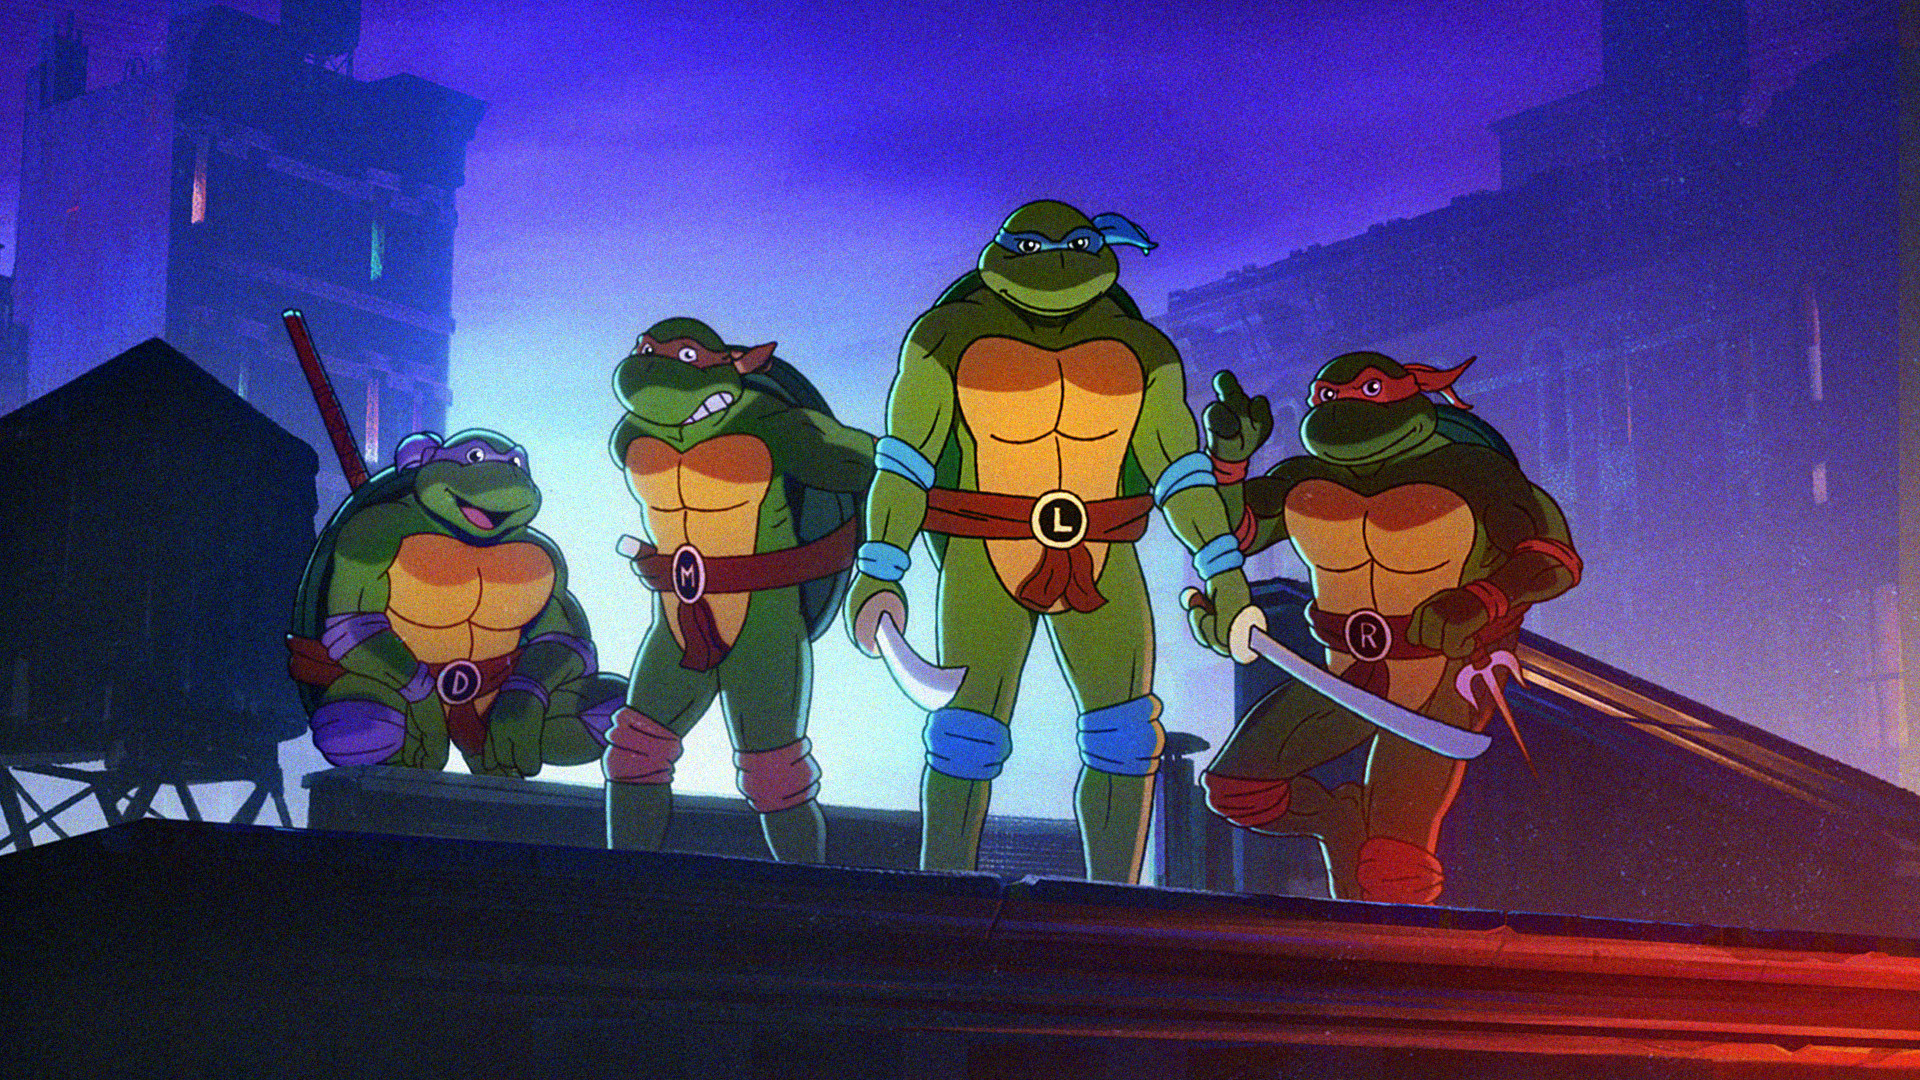  The theme for the new Ninja Turtles game is sung by Mike Patton from Faith No More 